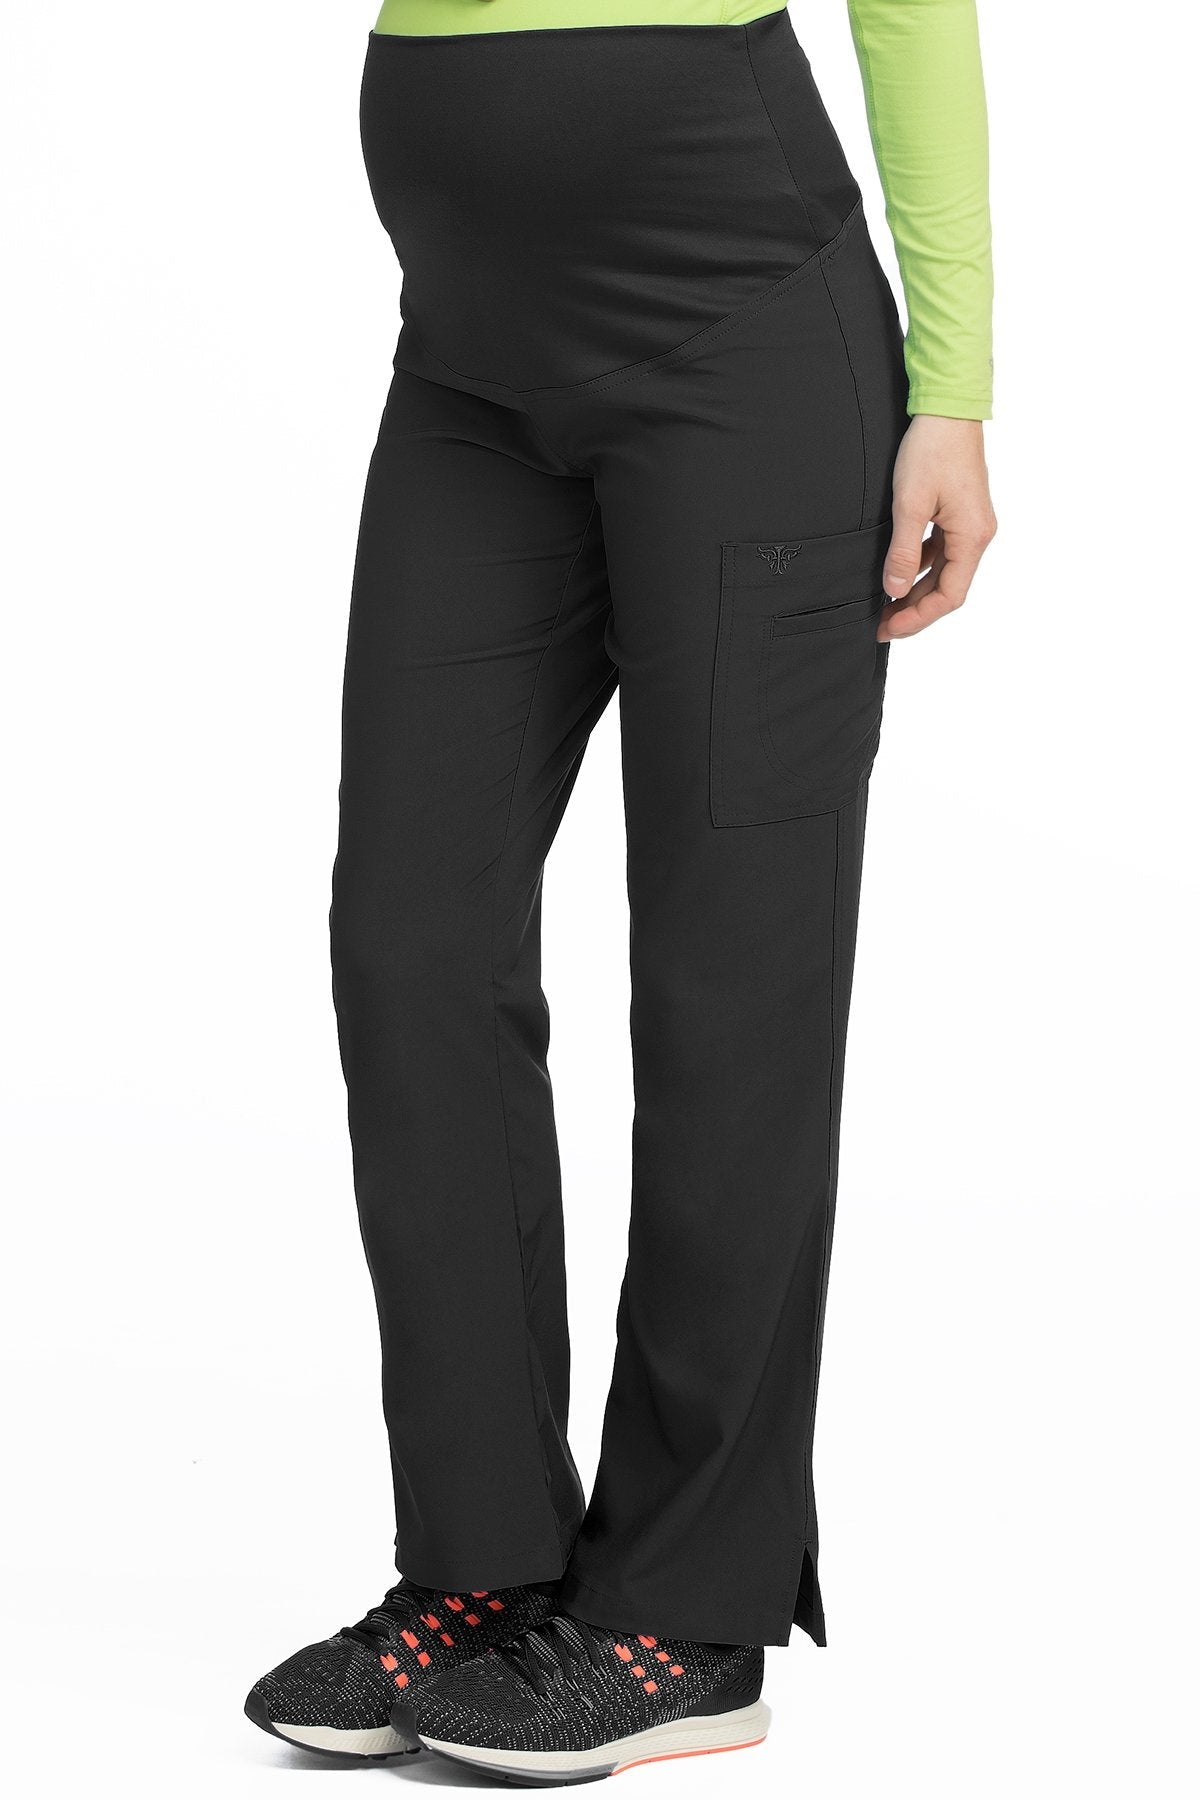 Med Couture Activate Maternity Pant Black